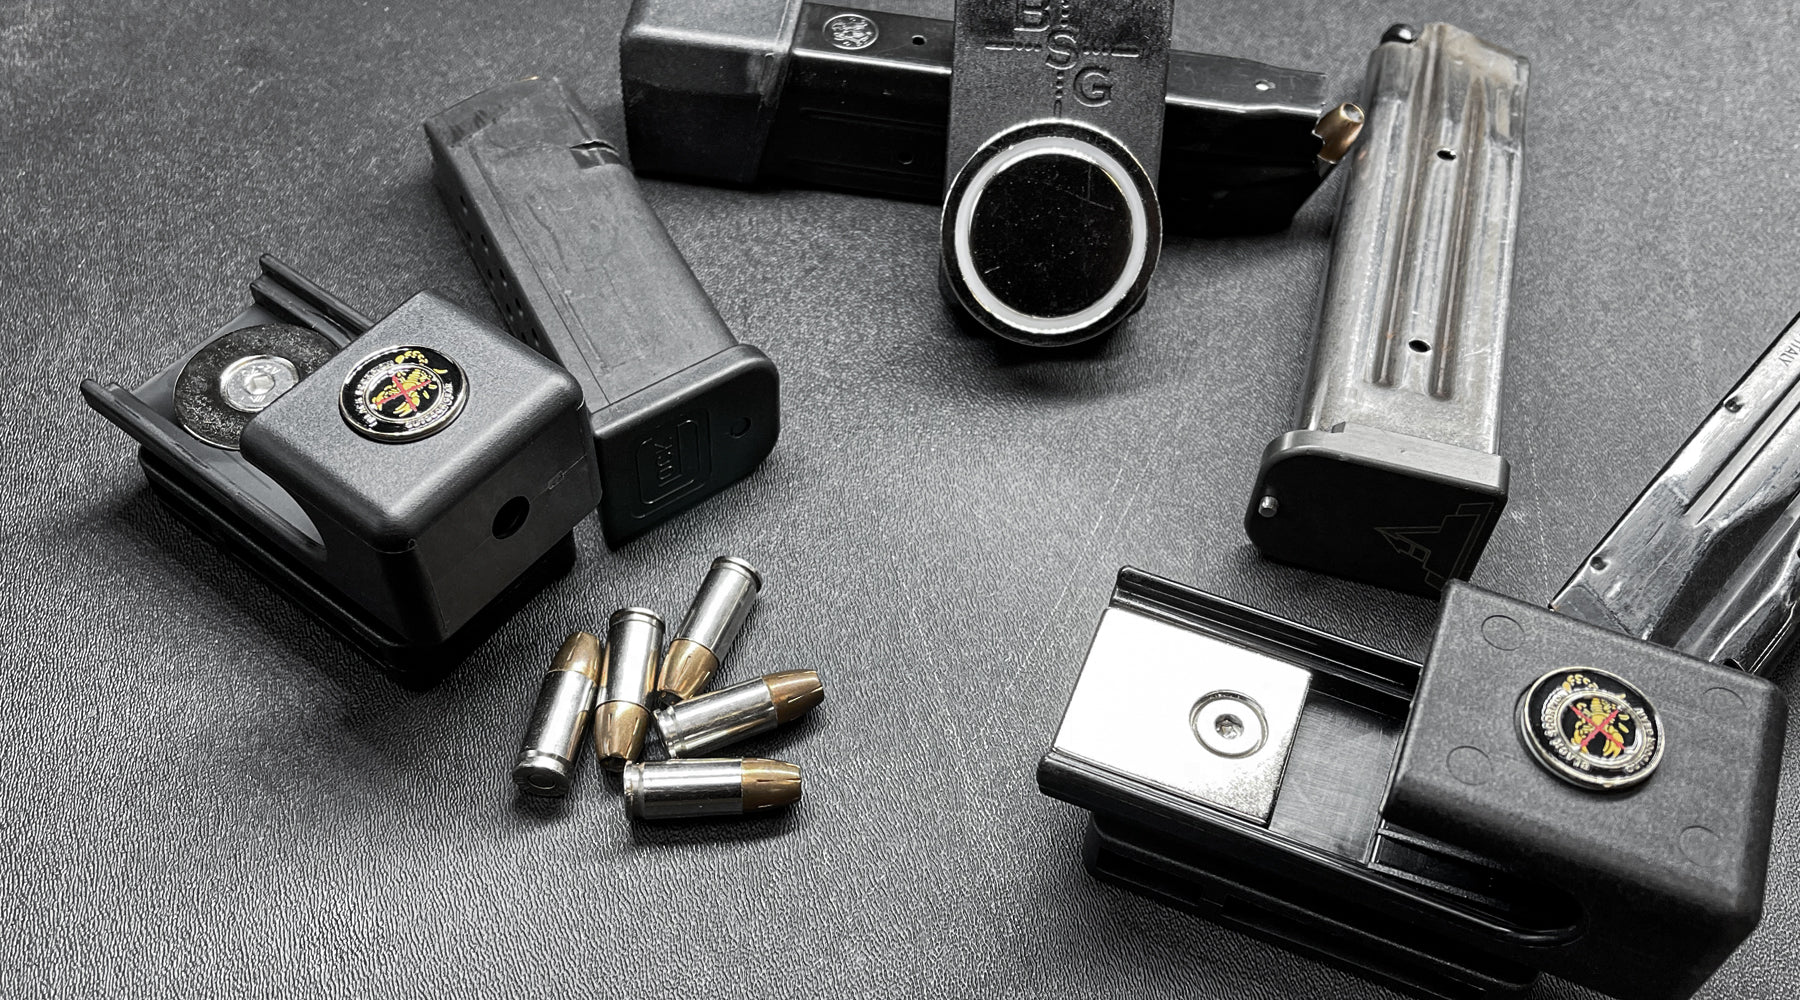 Magnets & Flashlights are Now Legal in USPSA